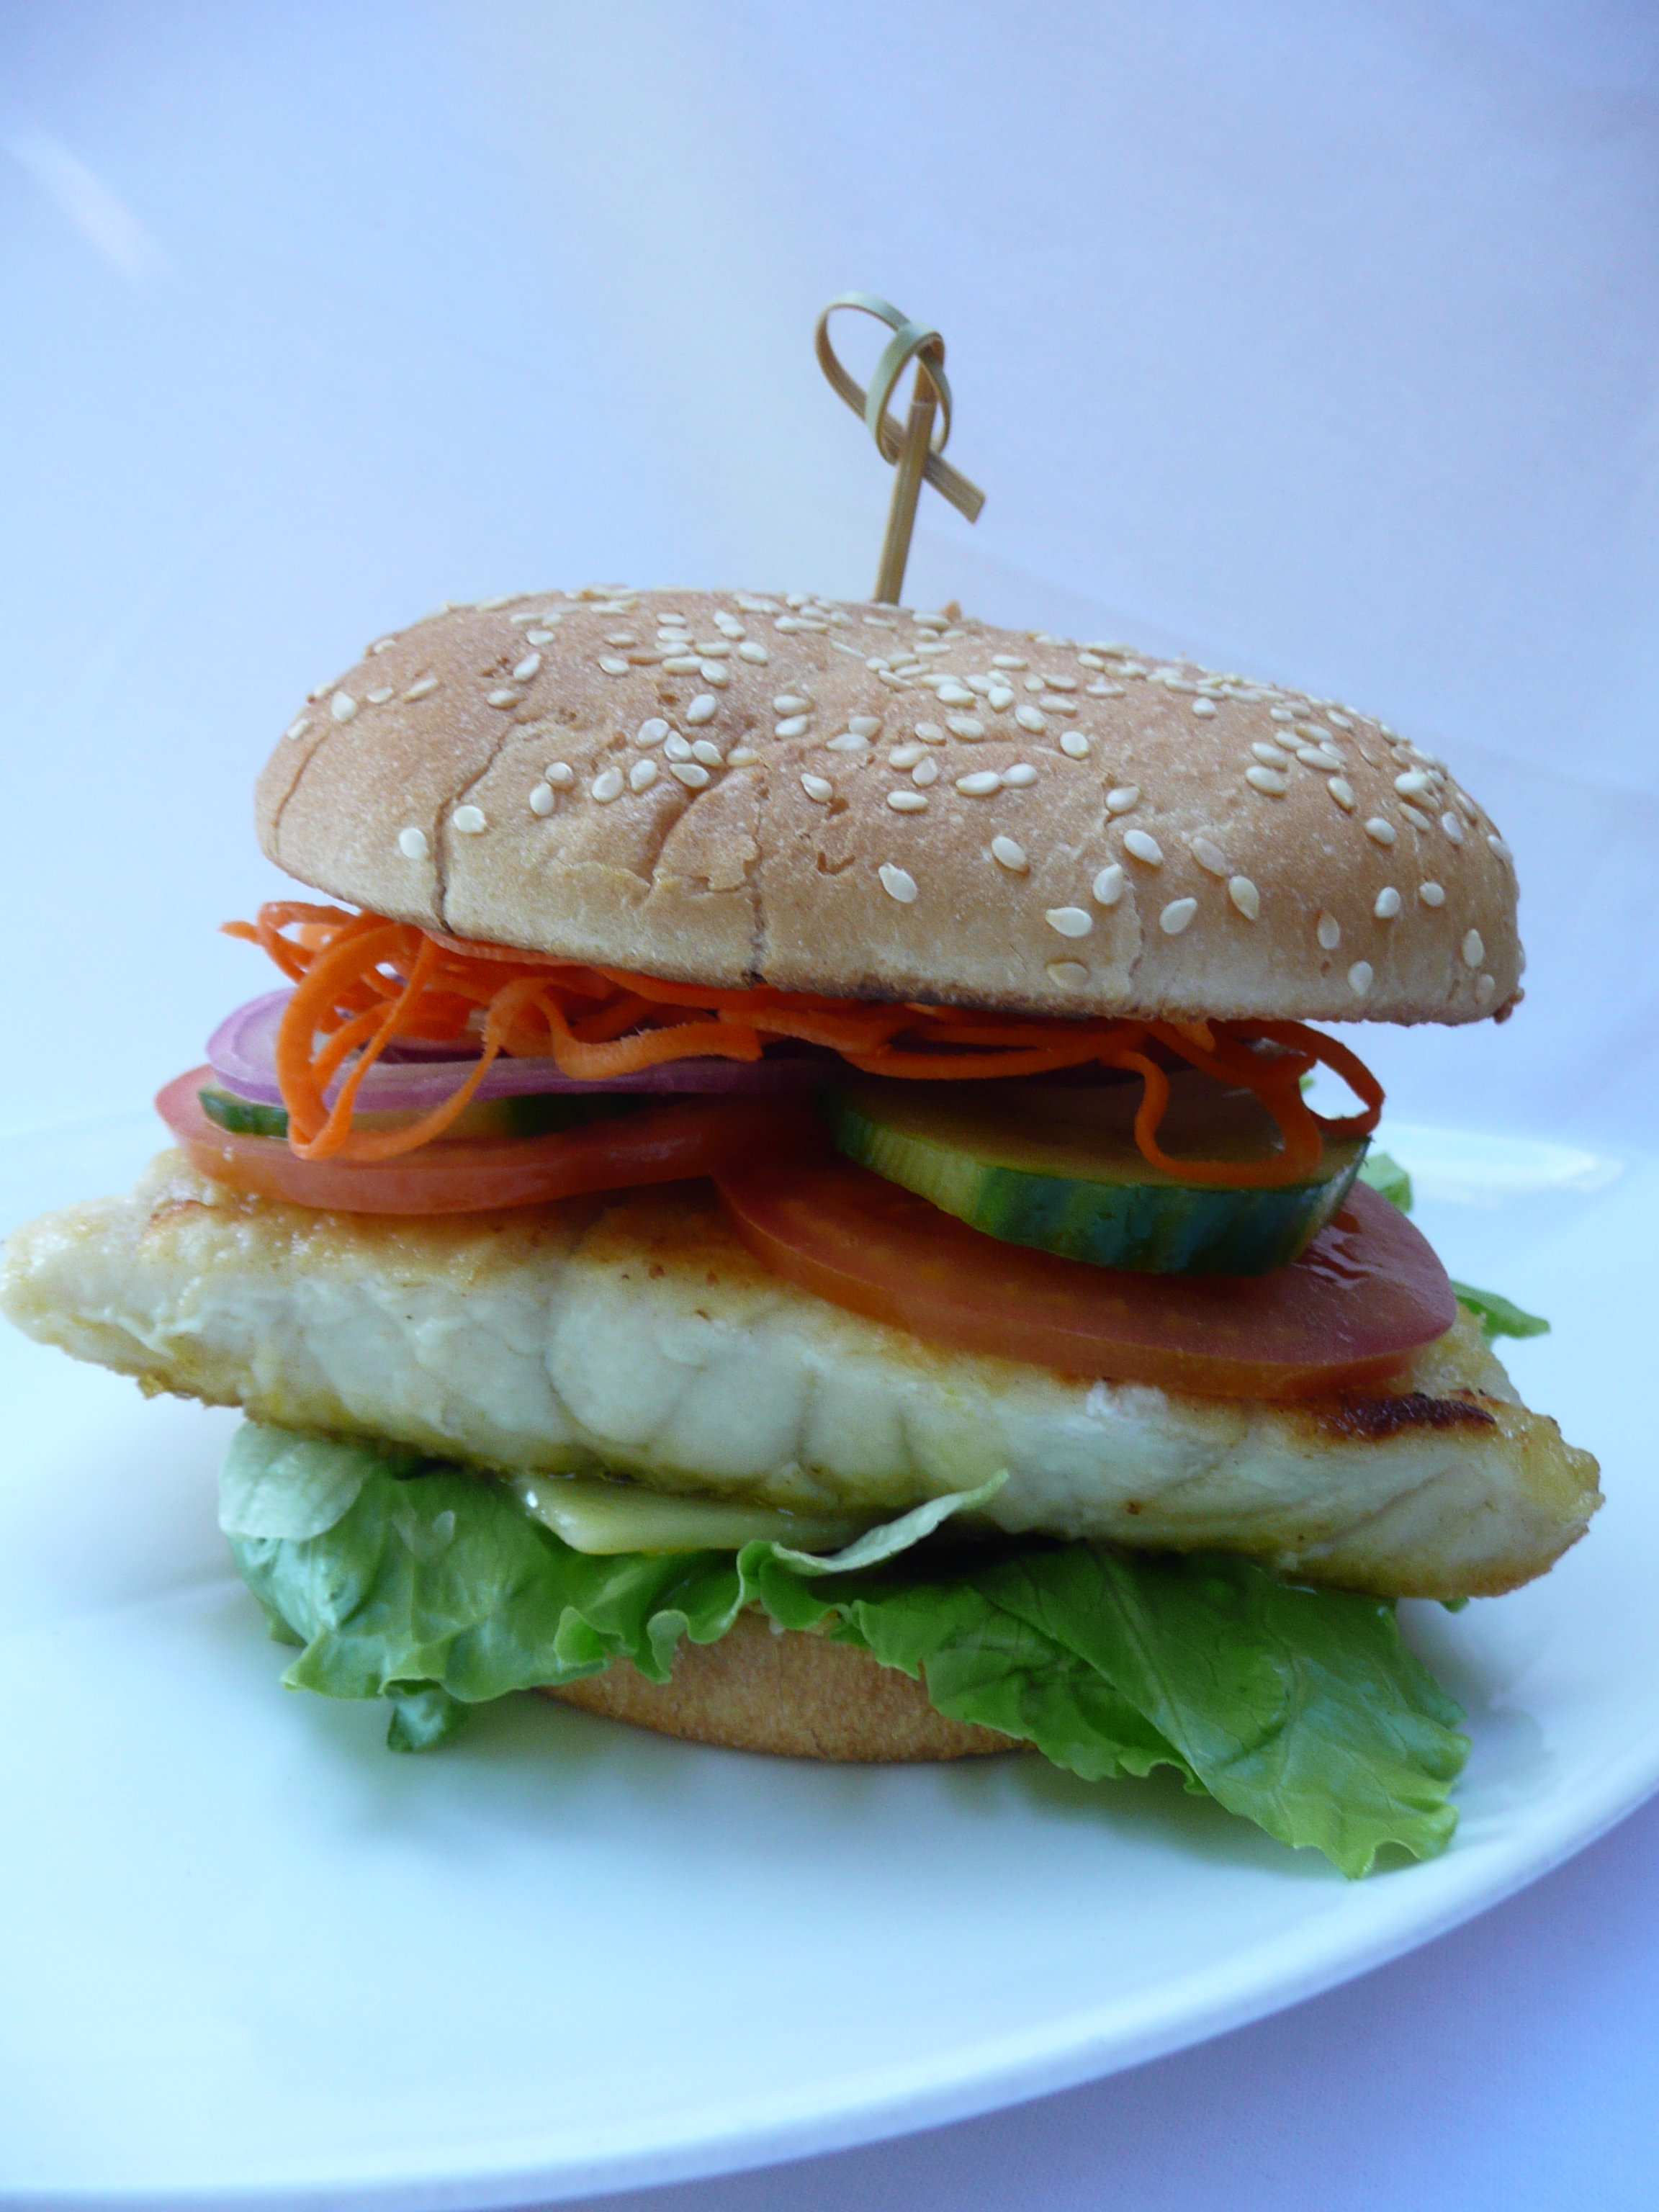 Our Barra Burger.  Barramundi is a highly-prized fighting fish that is sourced locally.